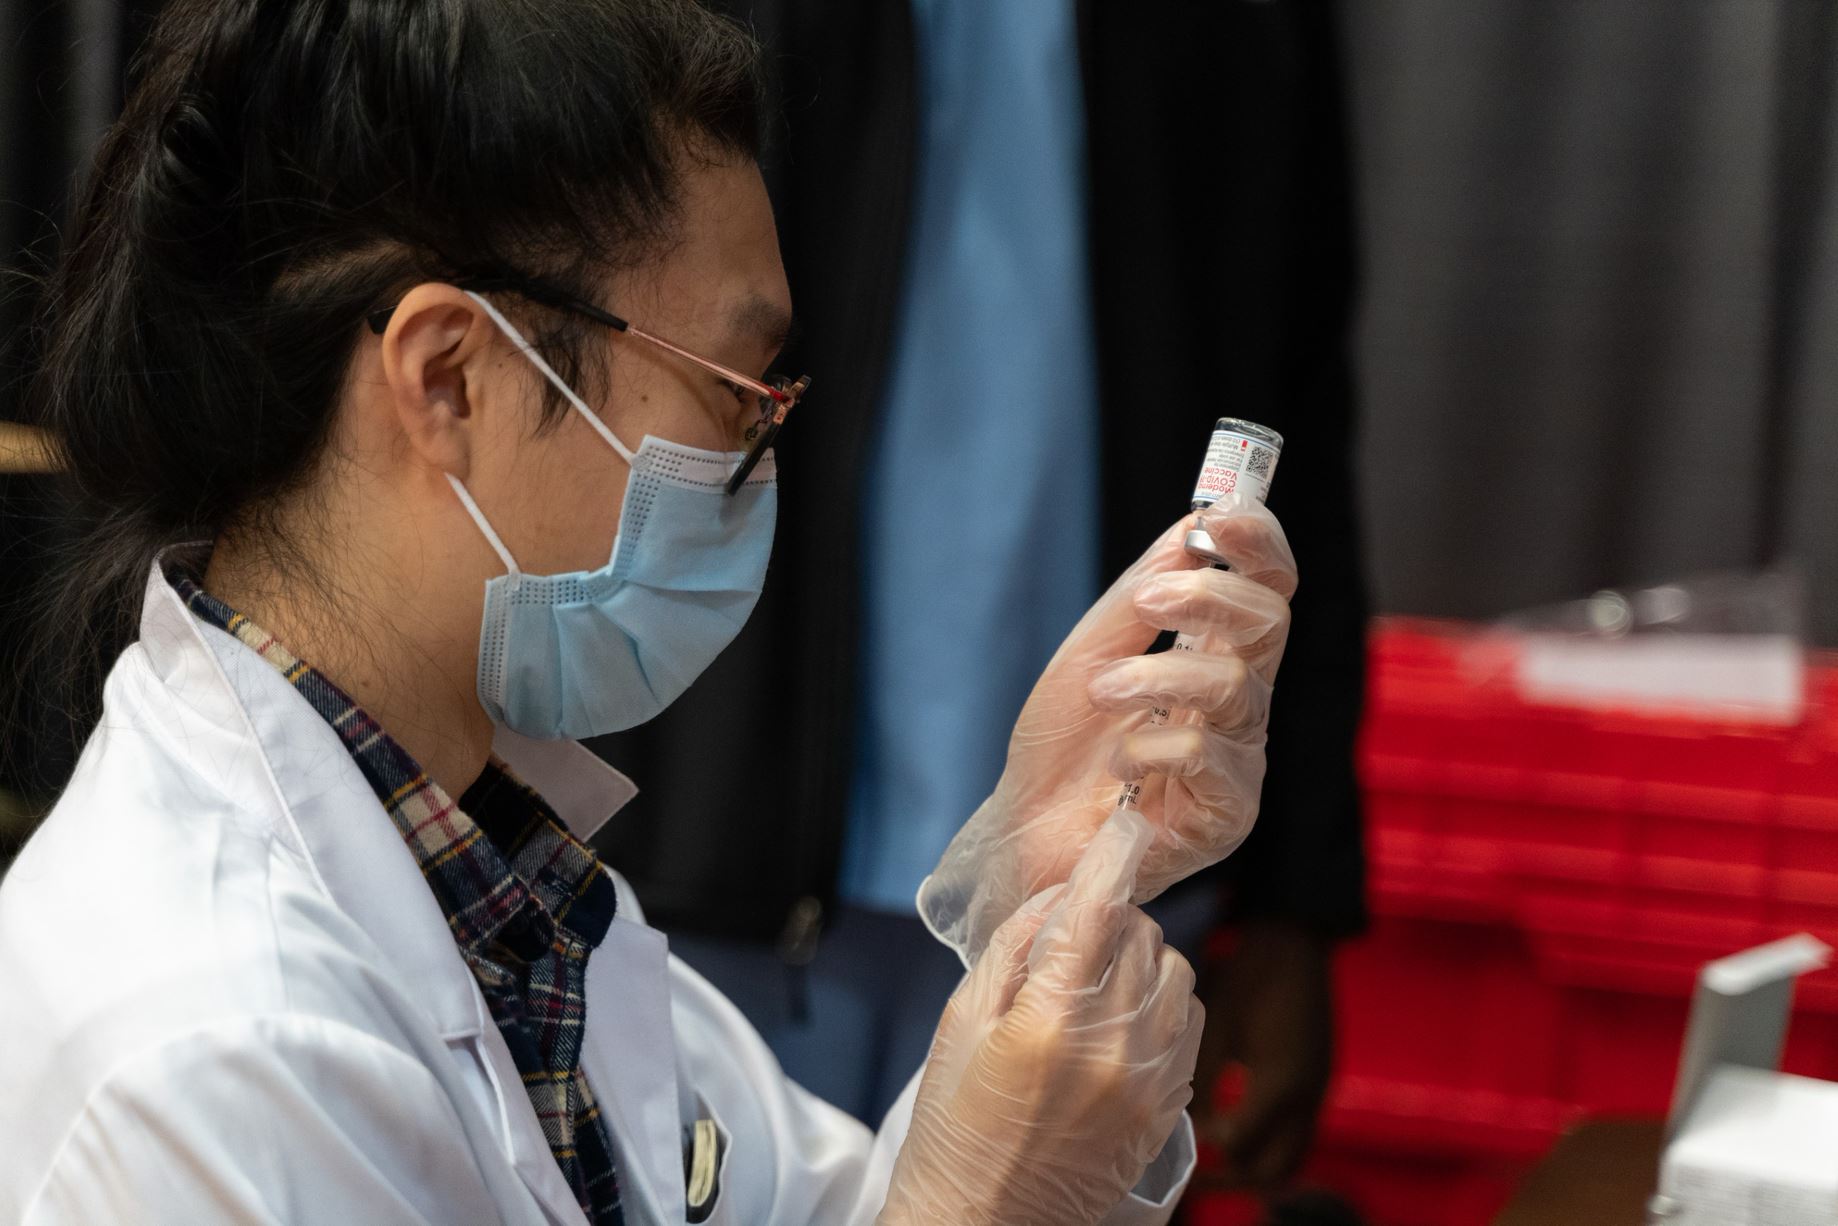 At UH’s first on-campus mass vaccination event, an administrator prepares a dose of the Moderna COVID-19 vaccine. All Texas adults will soon be eligible for vaccination under new state guidelines. | Courtesy of UH